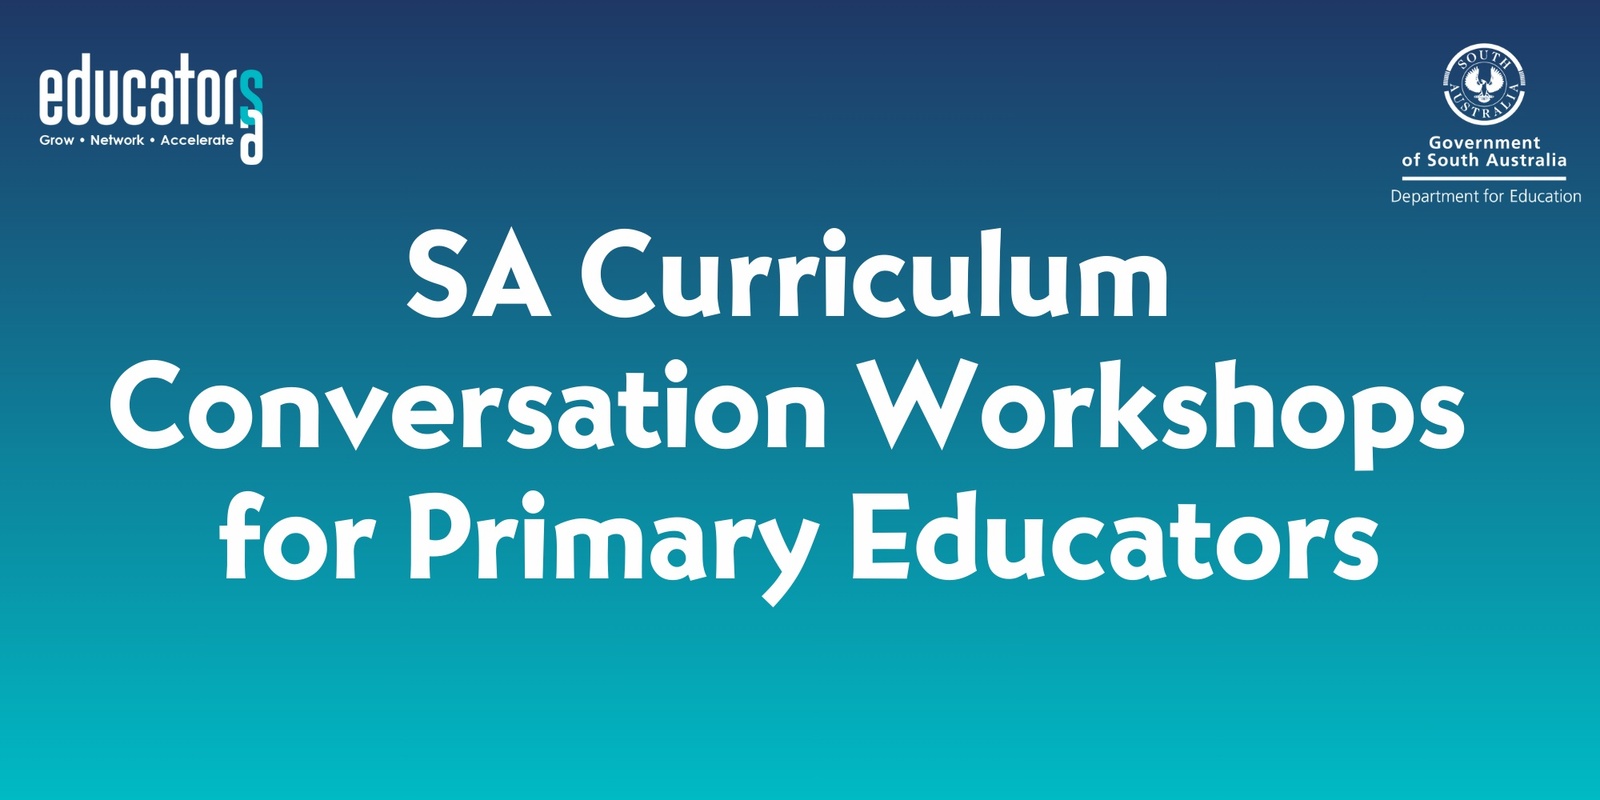 Banner image for SA Curriculum Conversation Workshops for Primary Educators 